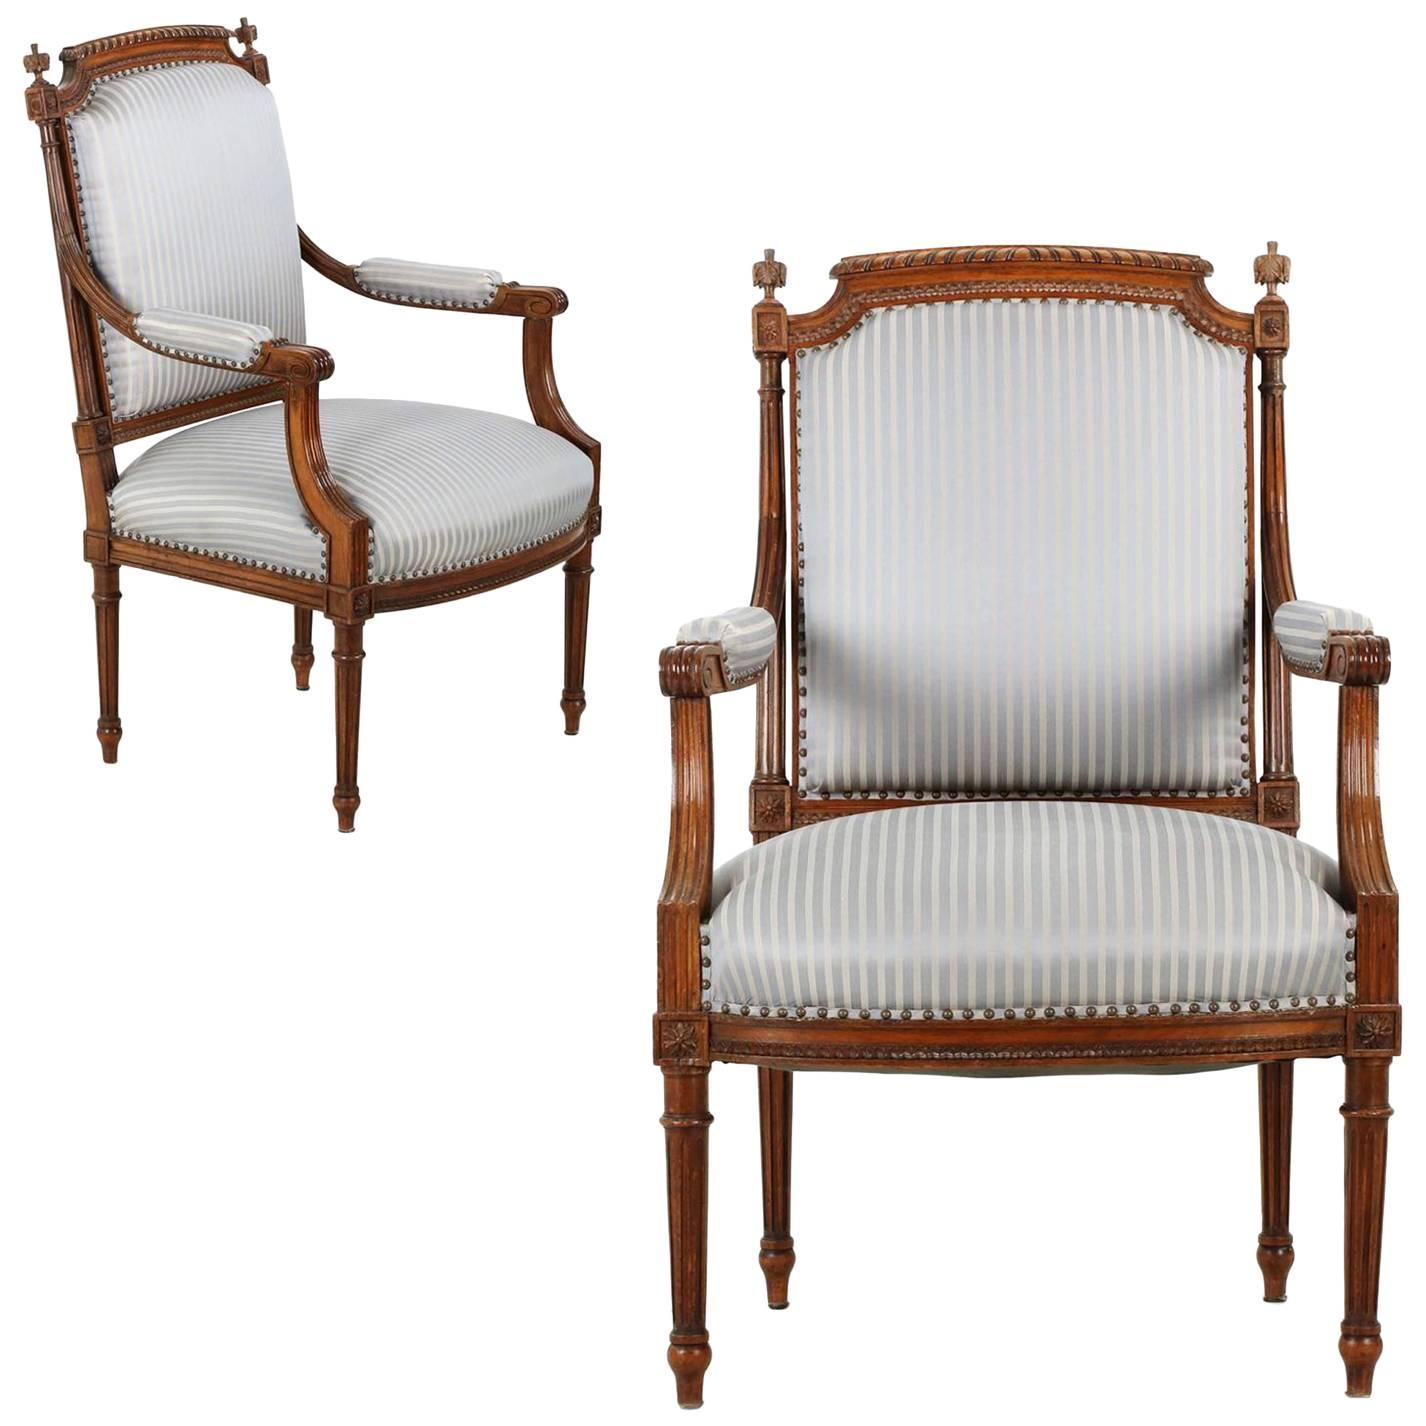 Pair of French Louis XVI Style Carved Walnut Antique Armchairs